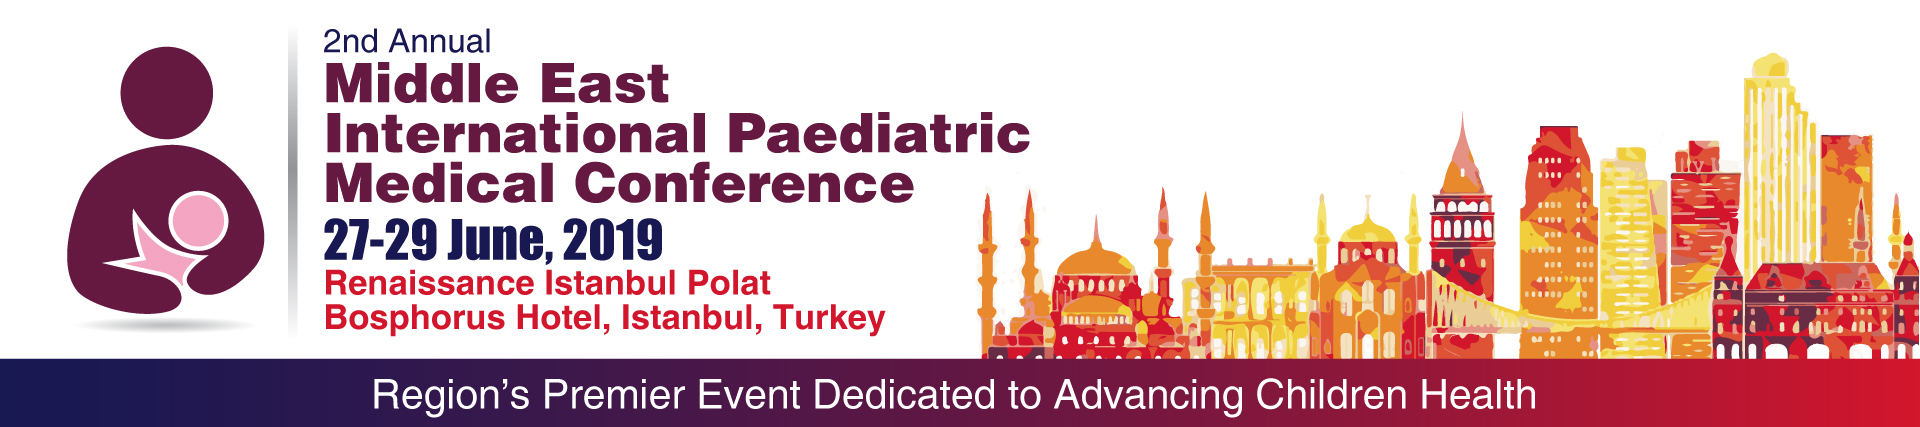 The Middle East International Paediatric Medical Conference, Istanbul, İstanbul, Turkey